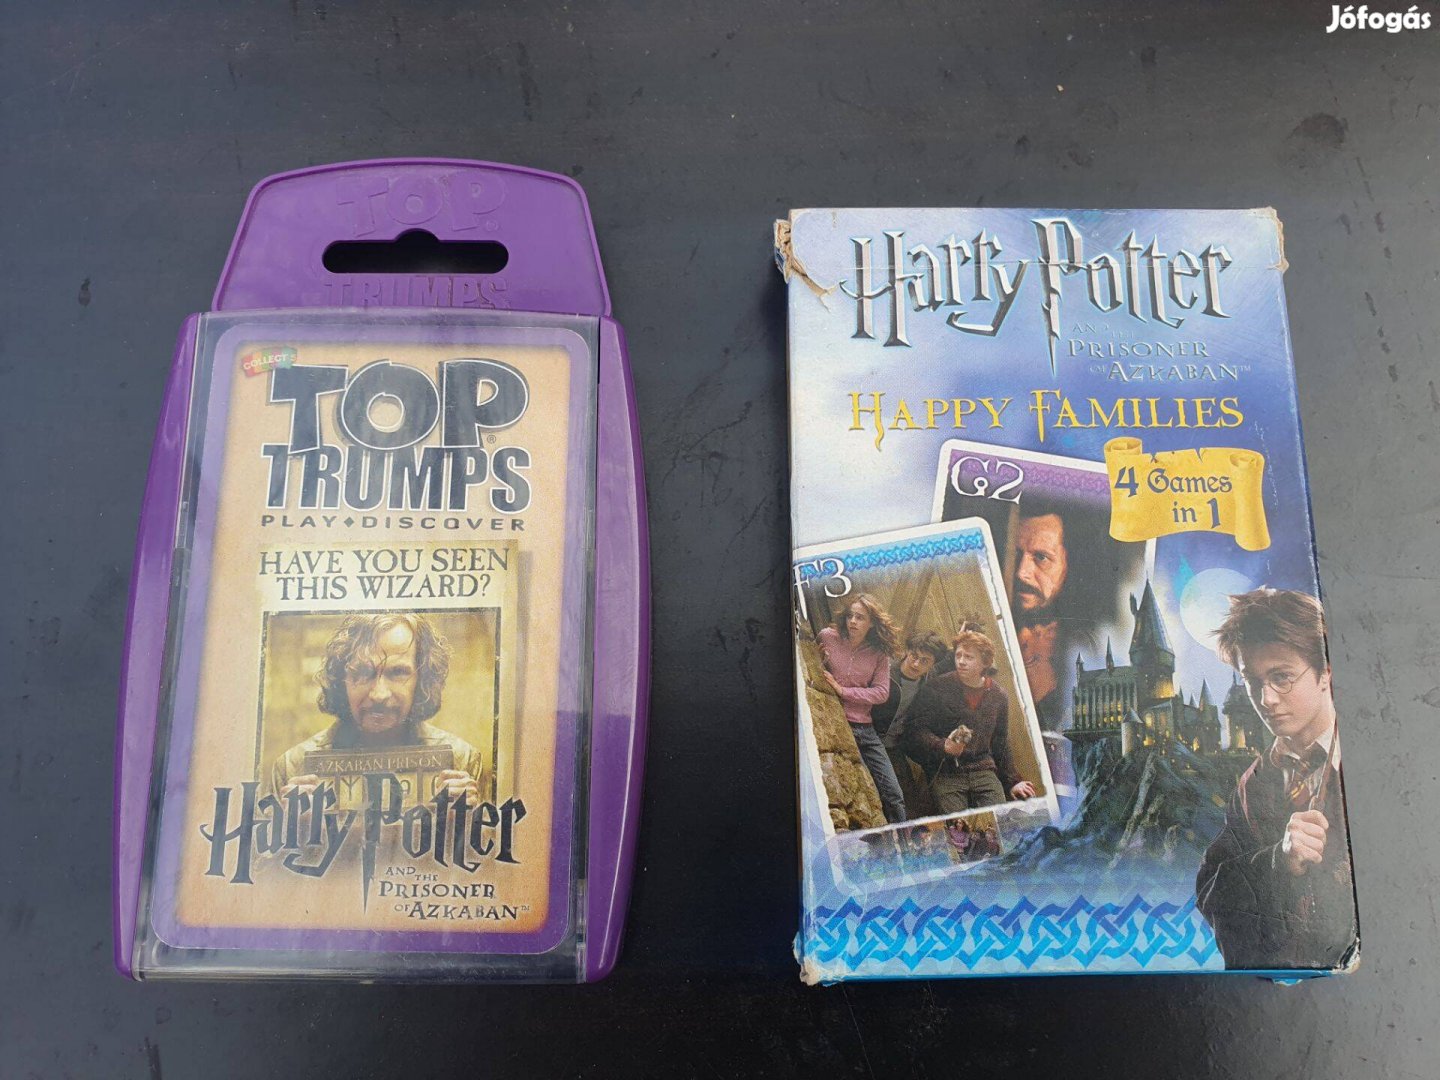 Harry Potter and the Prisoner of Azkaban Happy Families Card Game +1